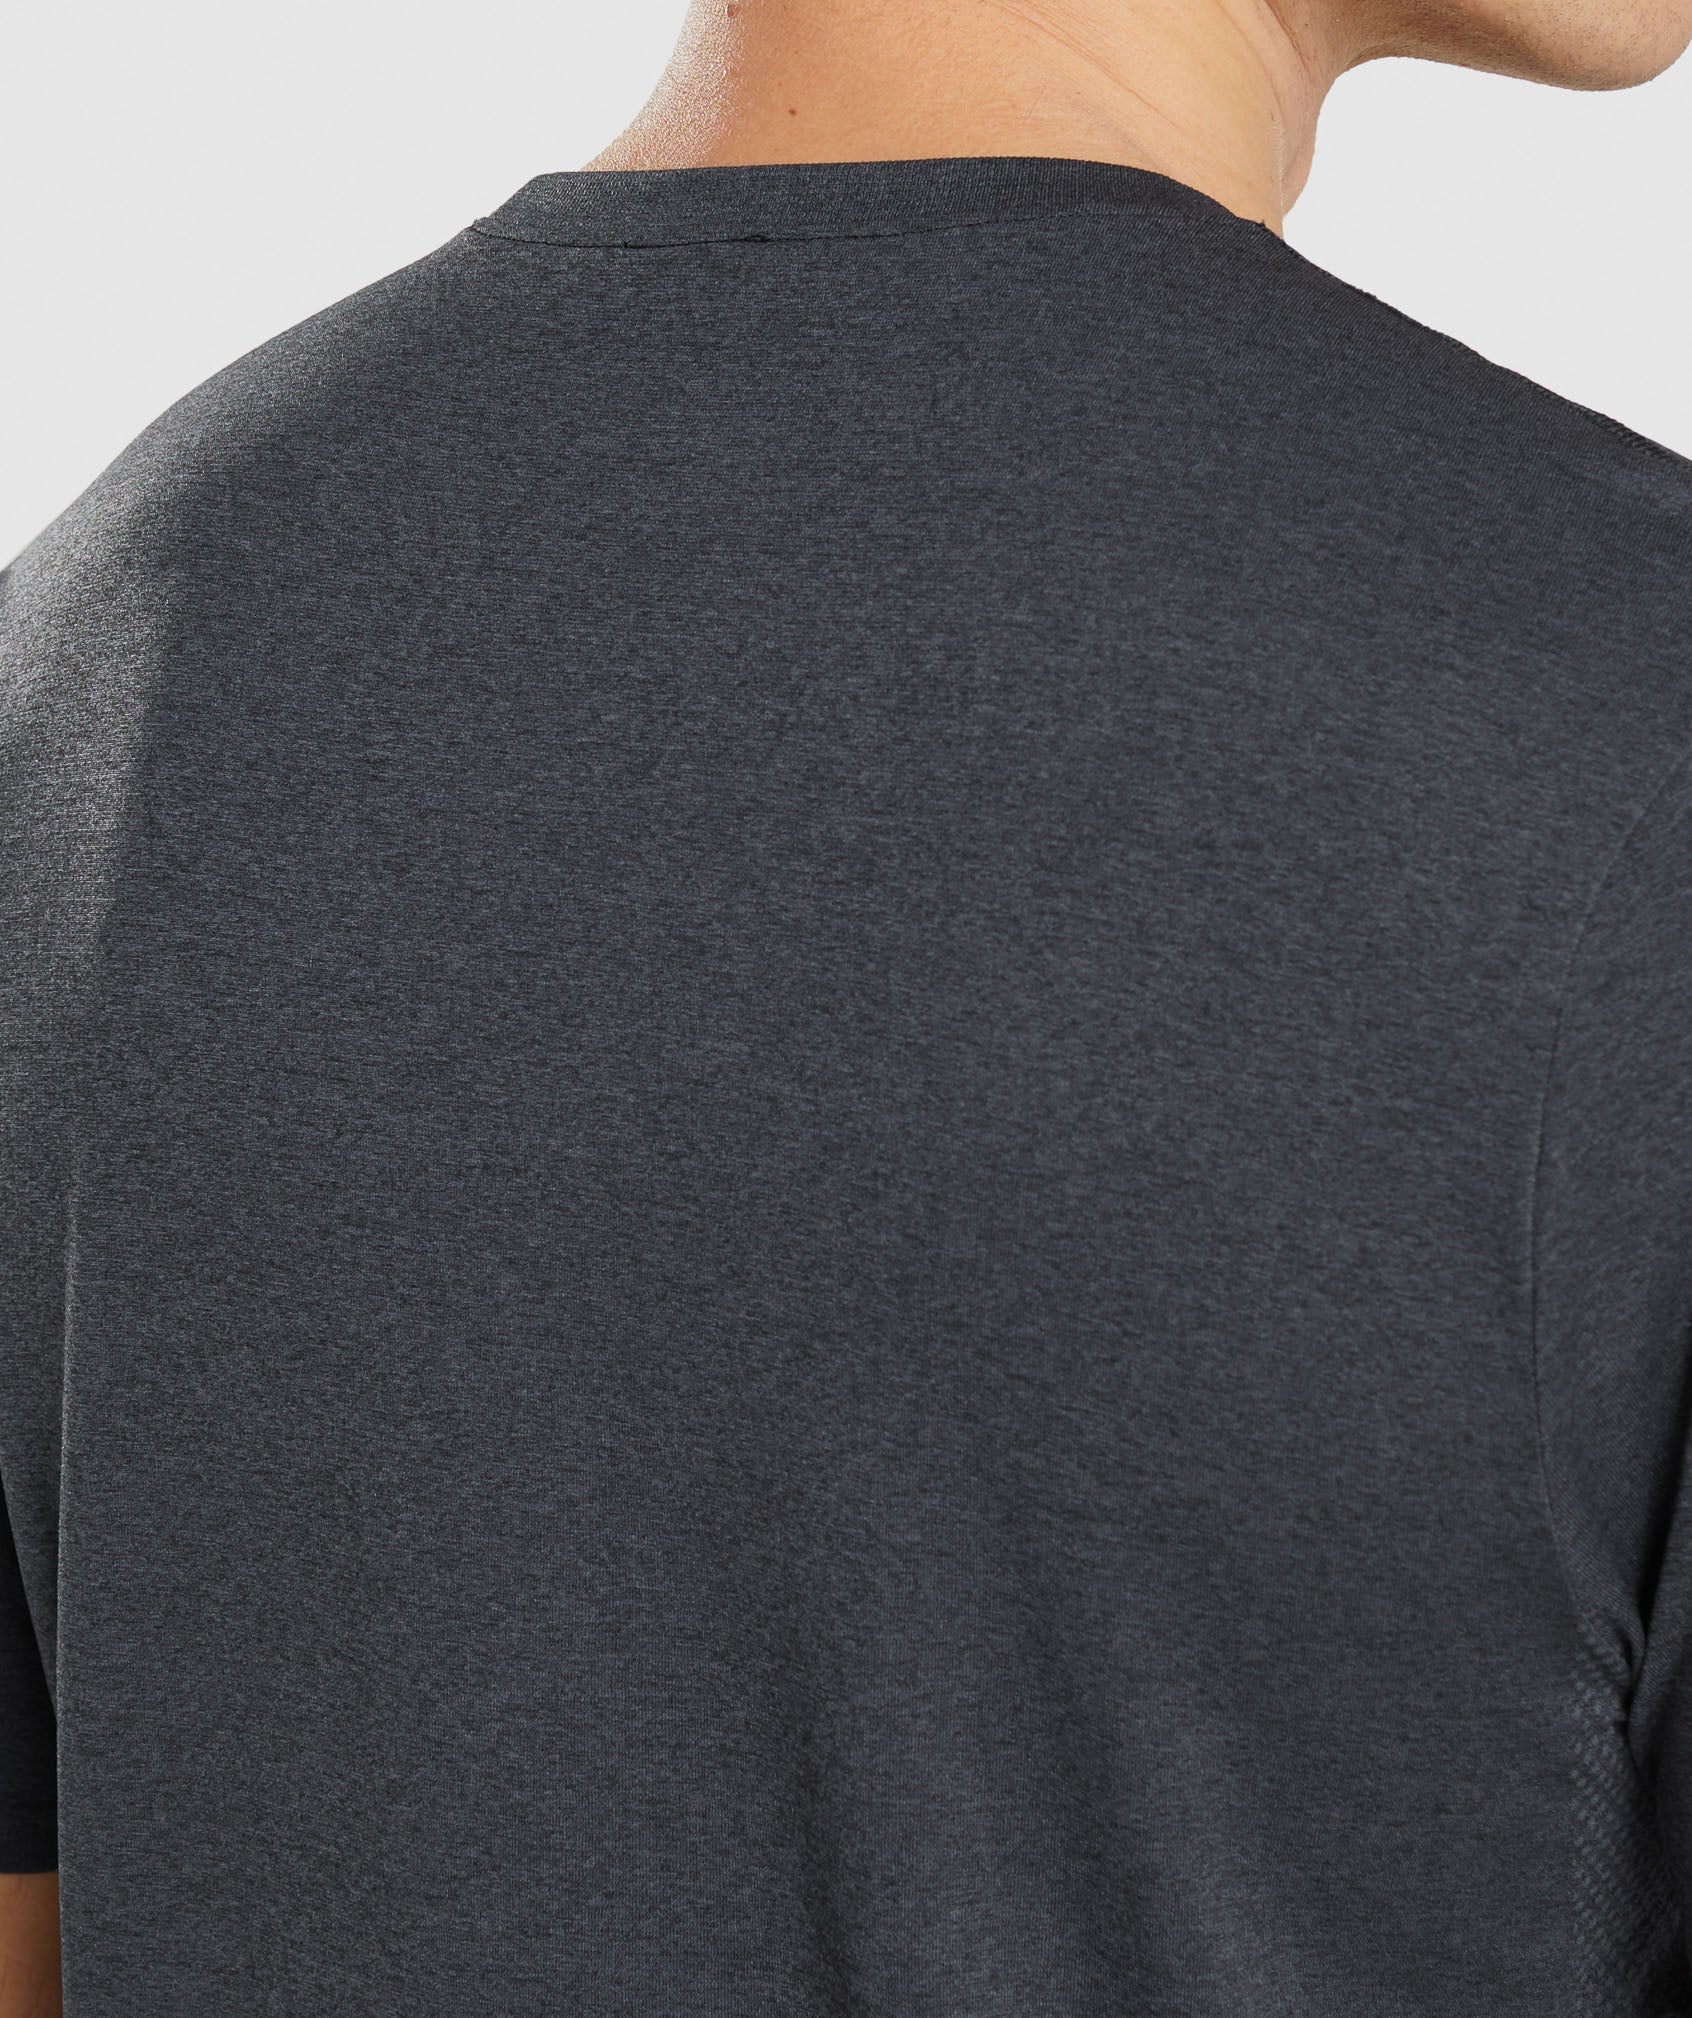 Arrival Seamless T-Shirt in Black Marl - view 6